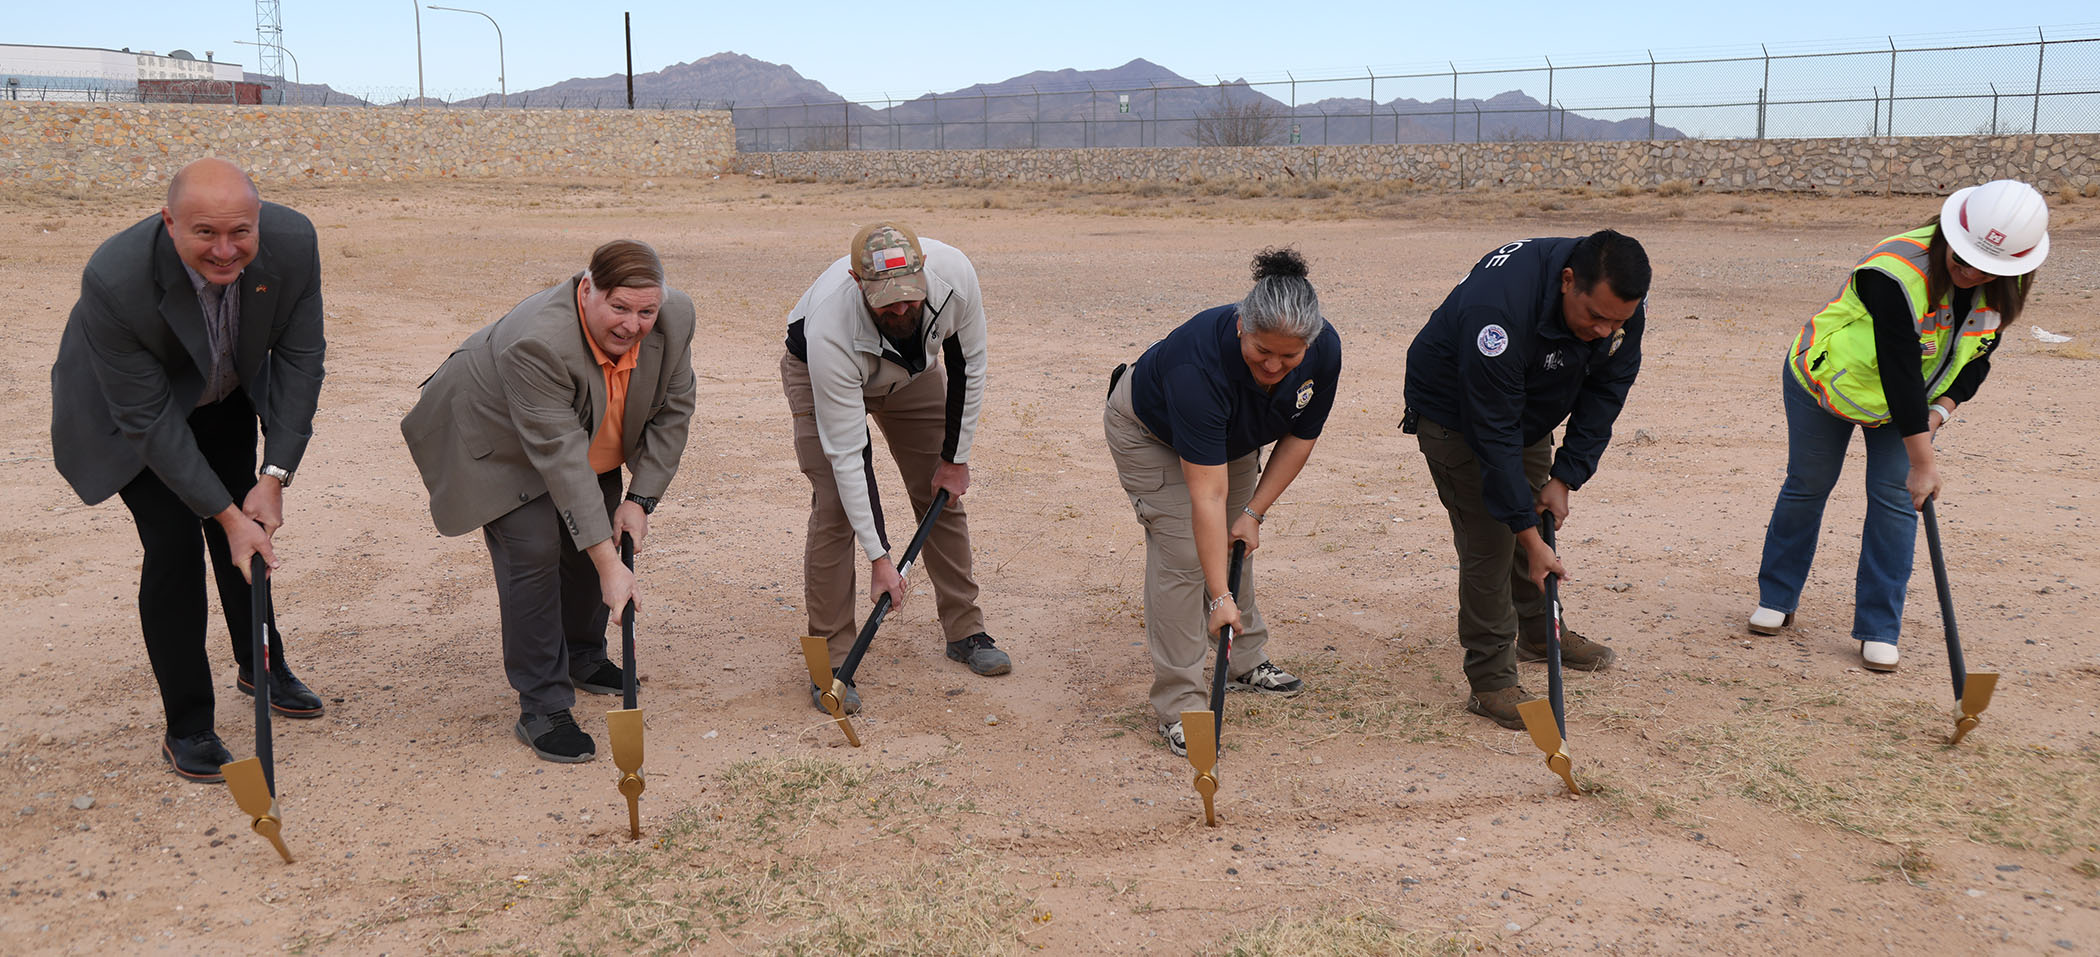 ERO breaks ground for new dormitory at El Paso Processing Center